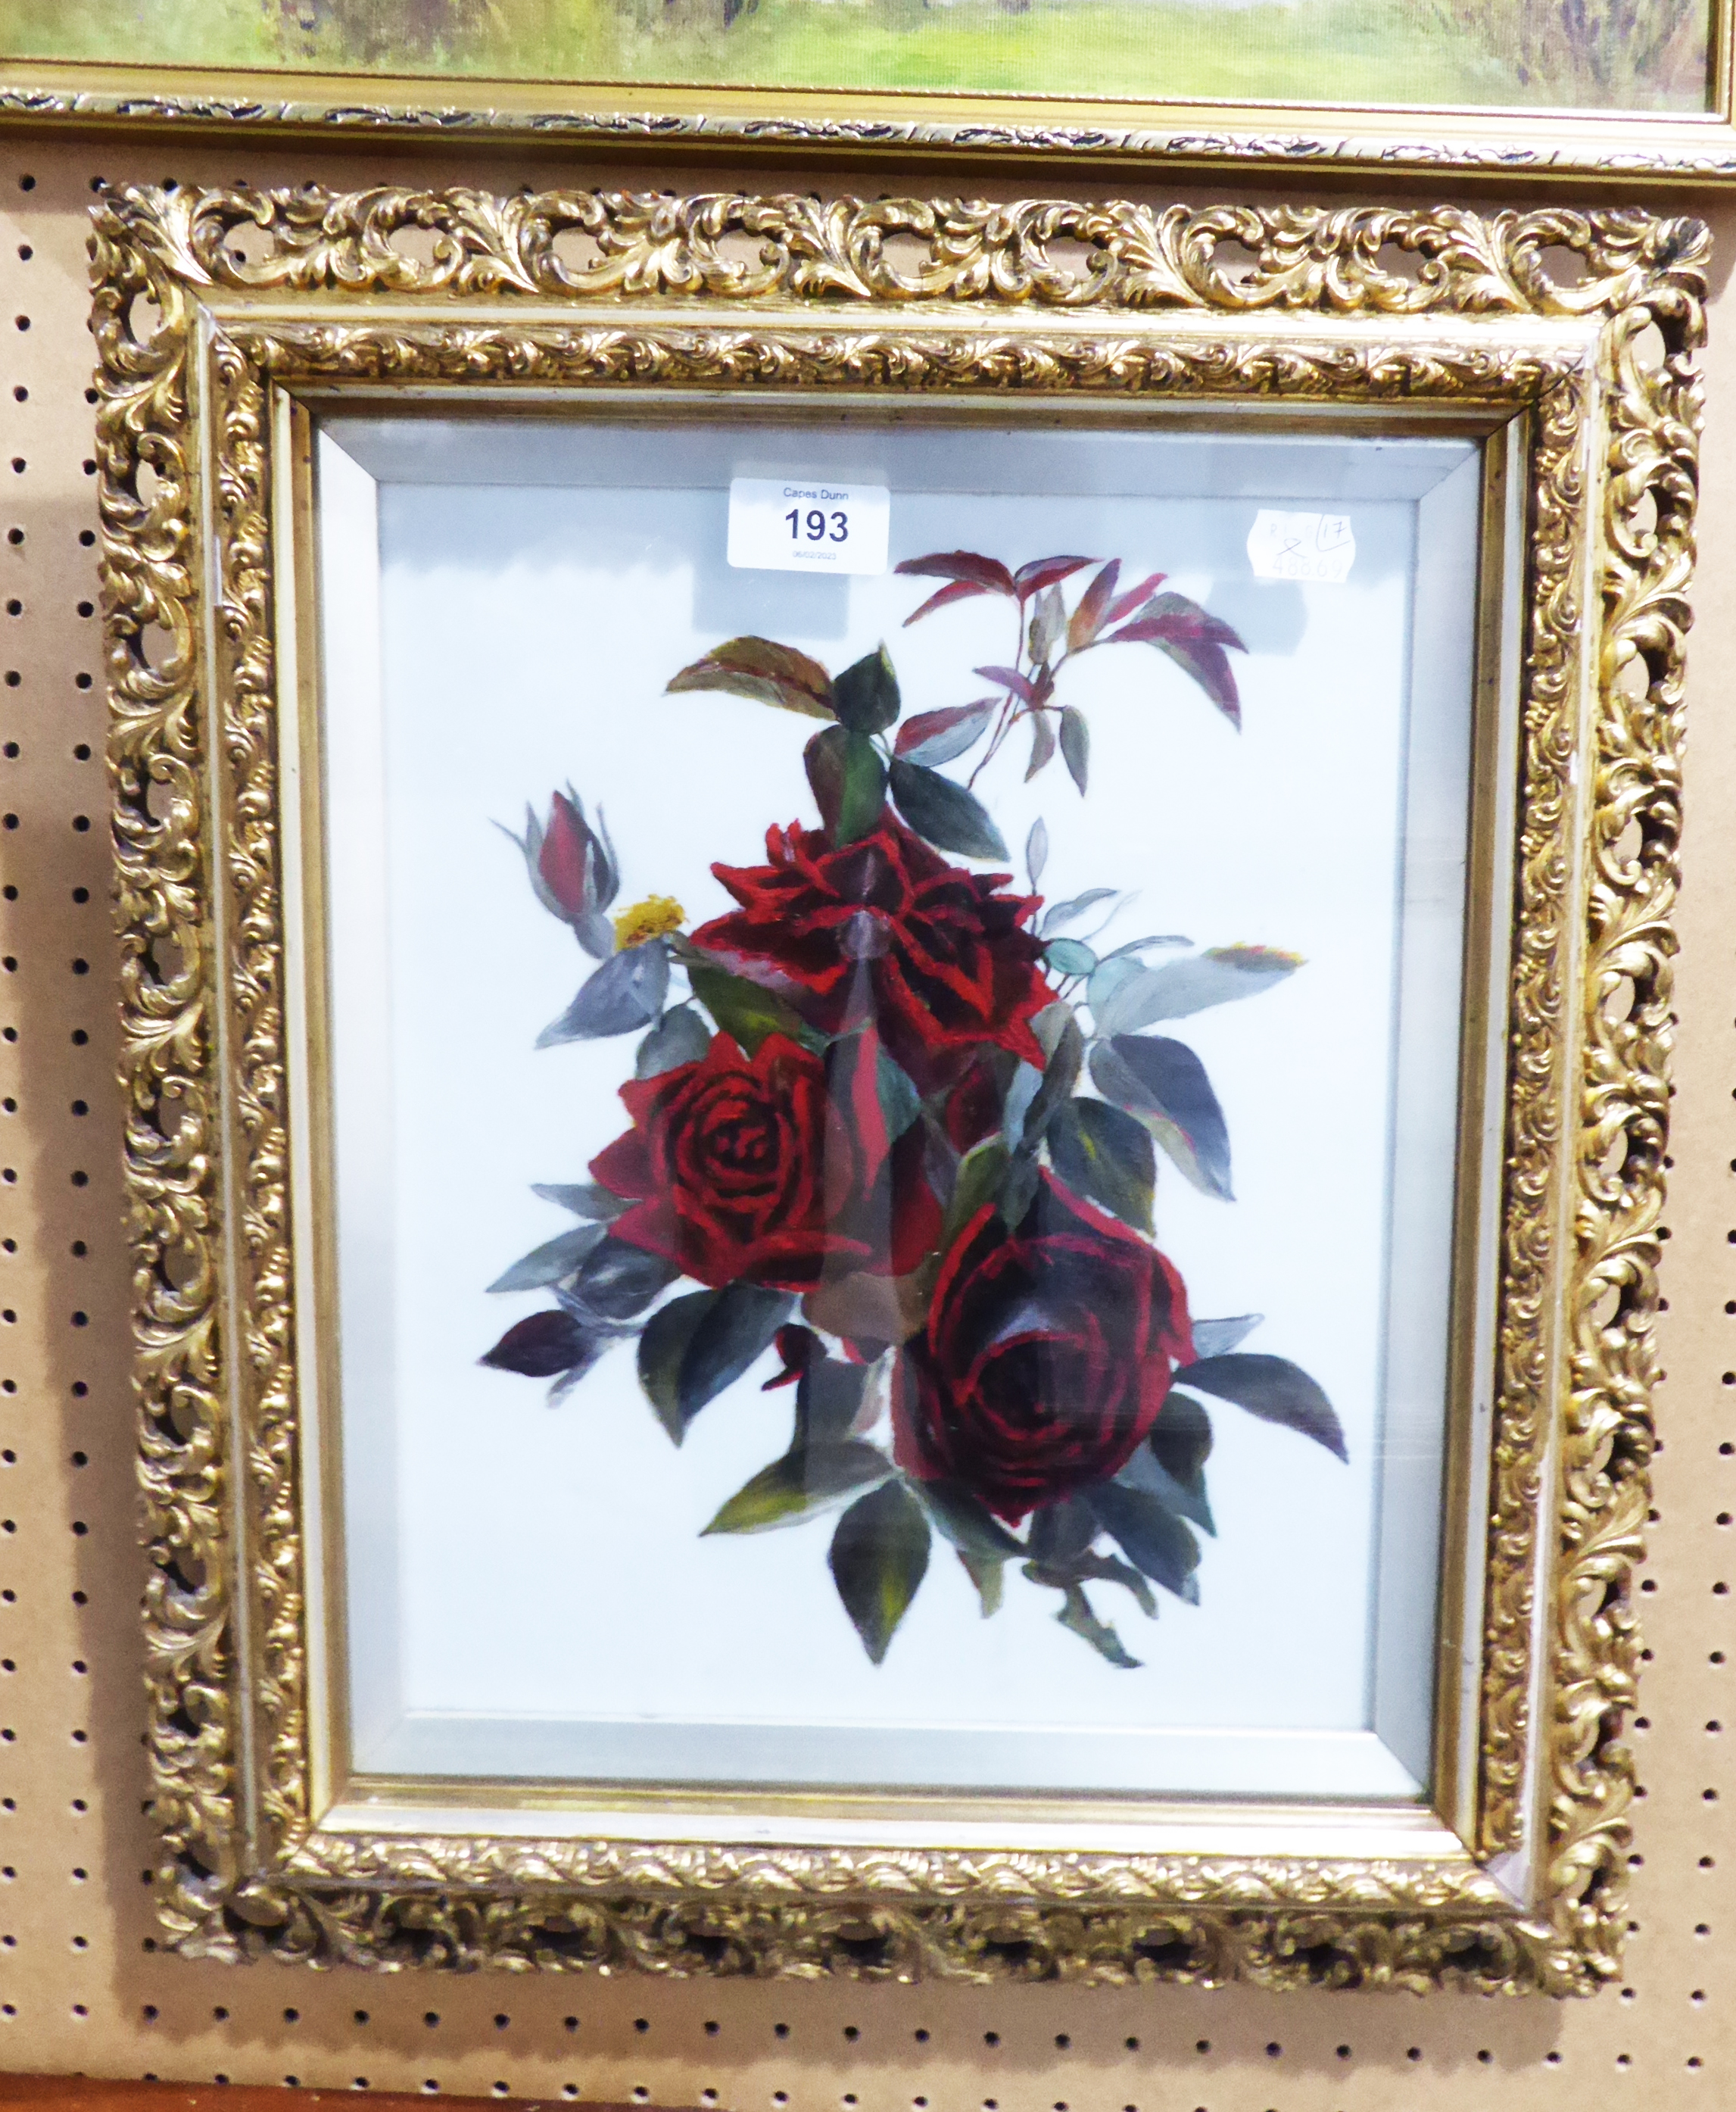 VICTORIAN MILK GLASS PANE PAINTED WITH RED ROSES, 12 ½” X 10” (31.8cm x 25.4cm), framed and glazed